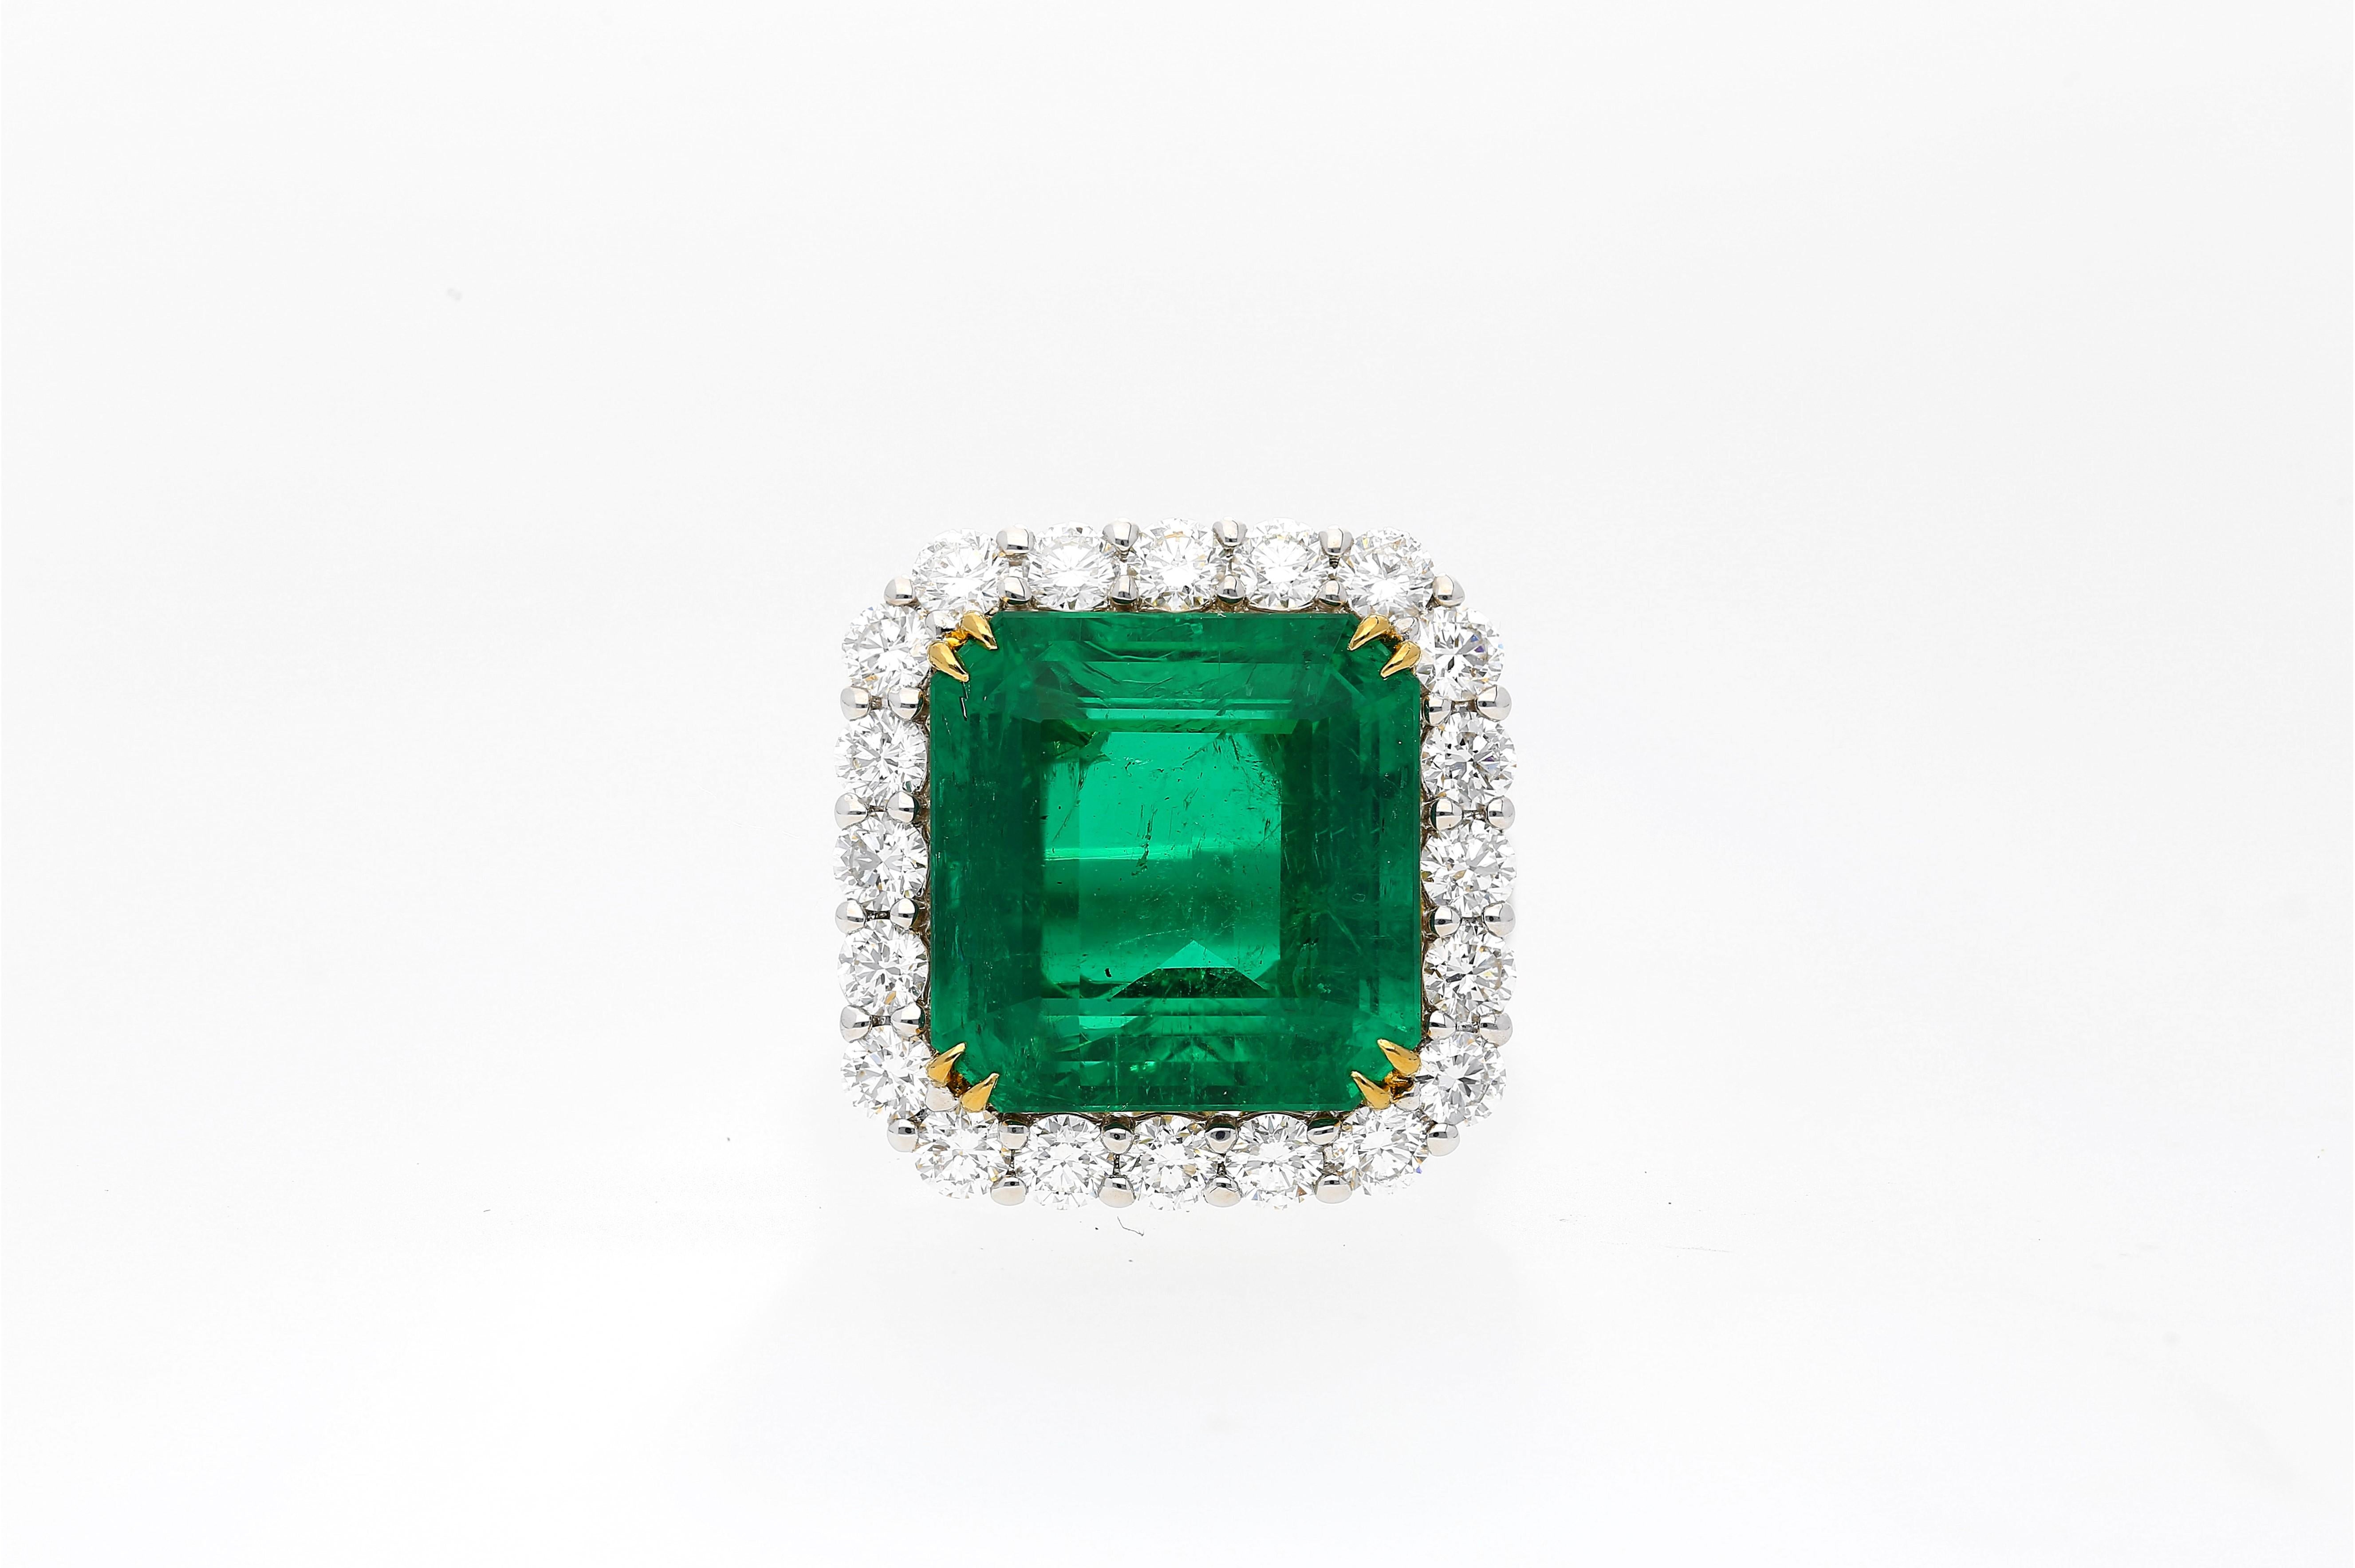 16.46 Carat Emerald-Cut vivid green Colombian Emerald framed by 48 Round-Brilliant Cut Diamonds totaling 2.60 Carats, and set in lush white and yellow 18 karat gold. This legendary center stone is of Colombian origin, and contains minor amounts of